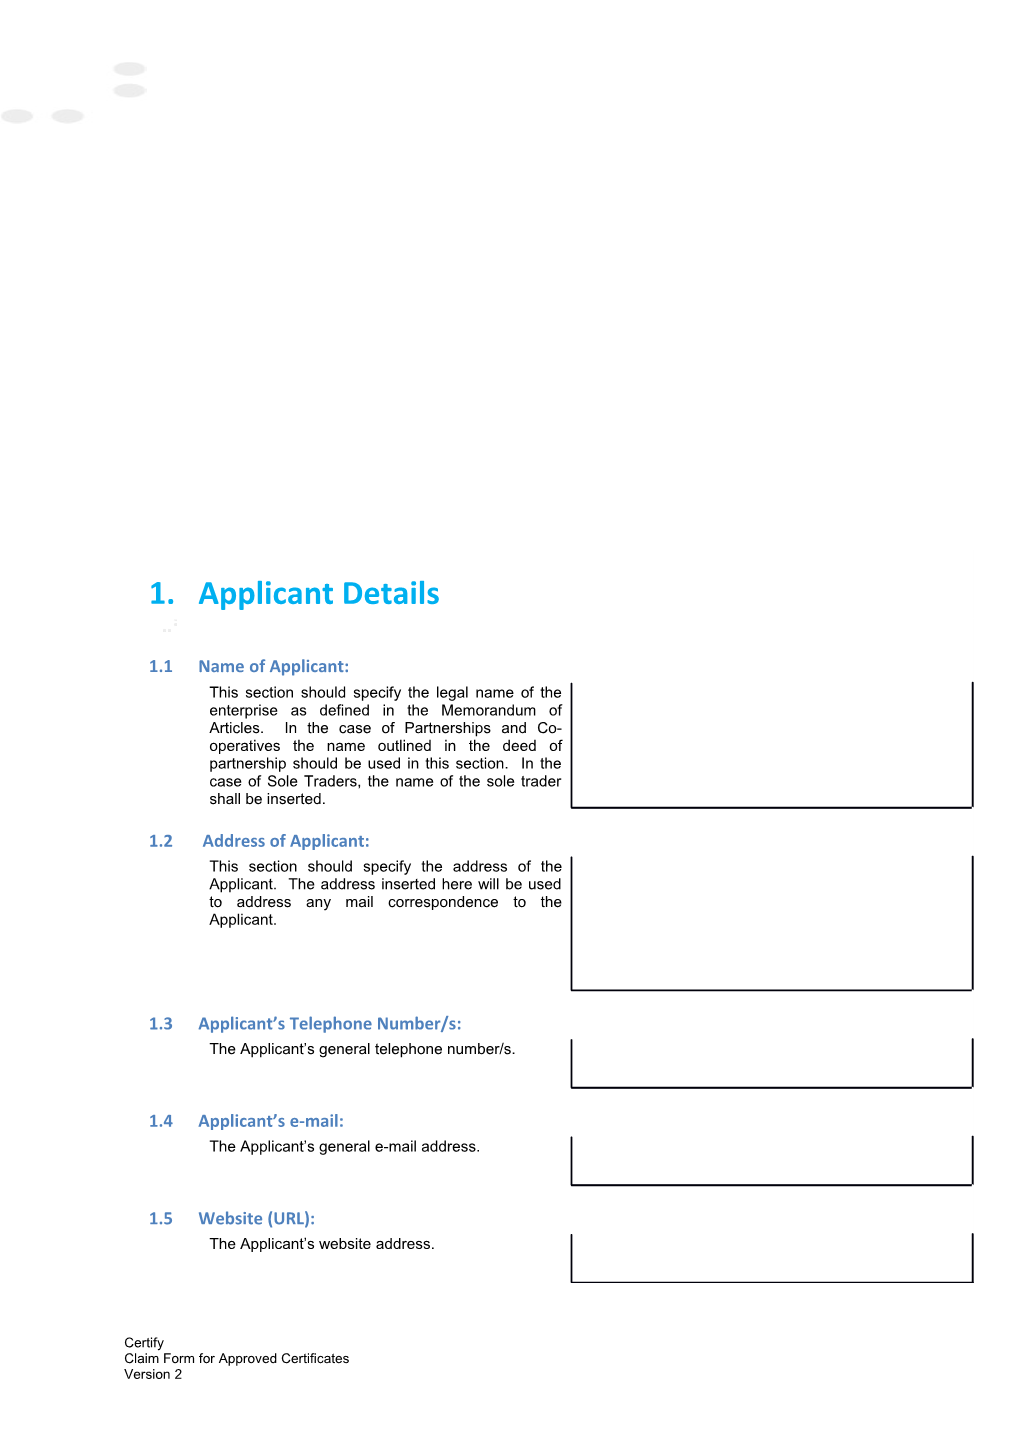 Claim Form for Approved Certifications